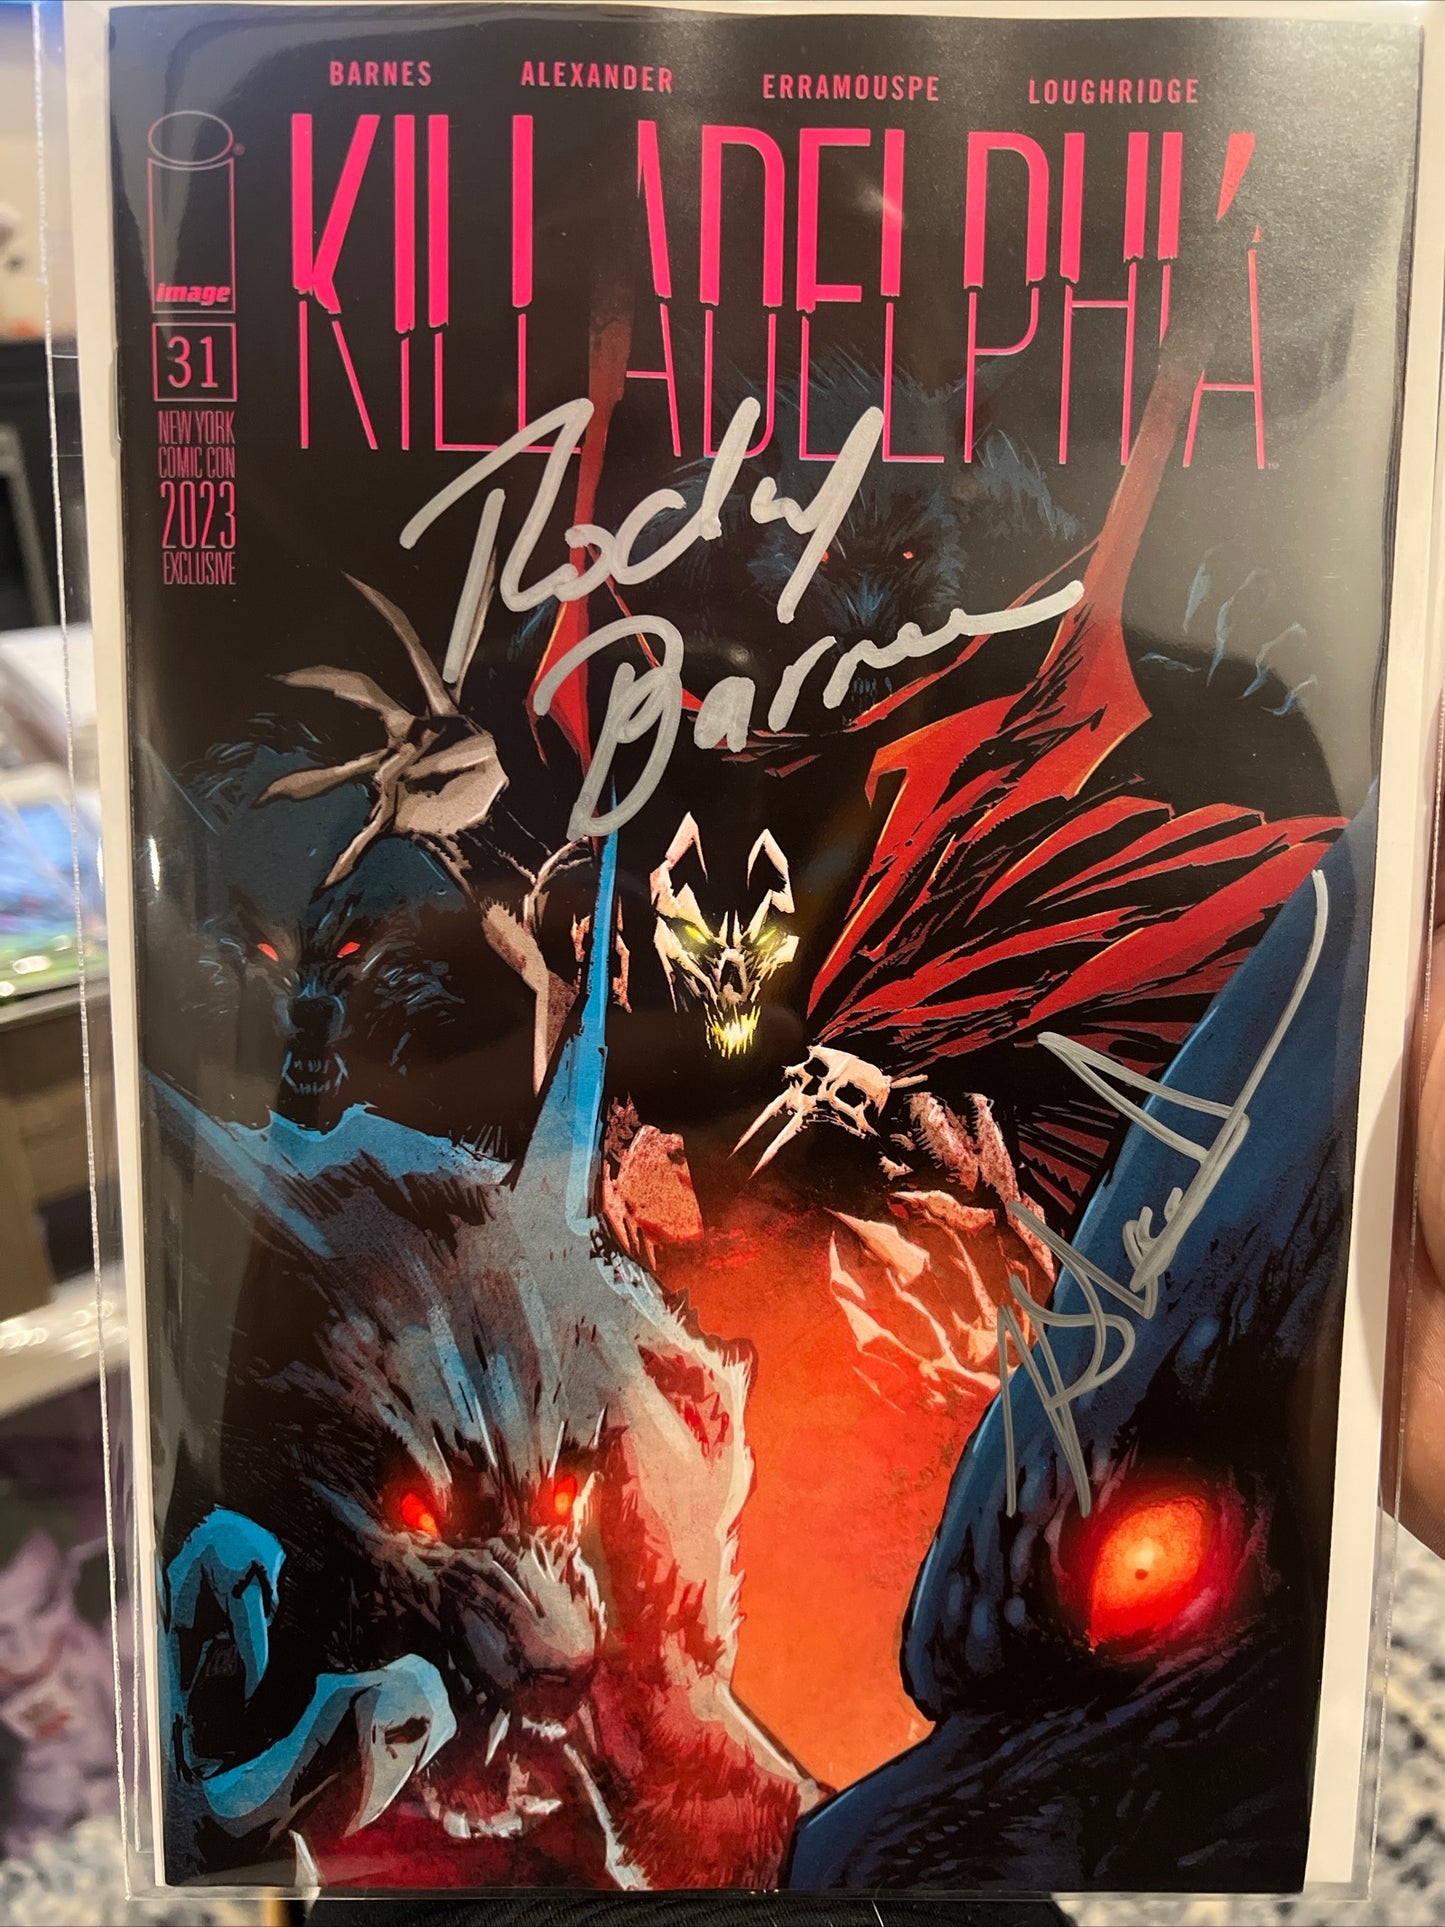 Killadelphia #31 (2023 NYCC Convention Exclusive) signed by Rodney Barnes and Jason Shawn Alexande